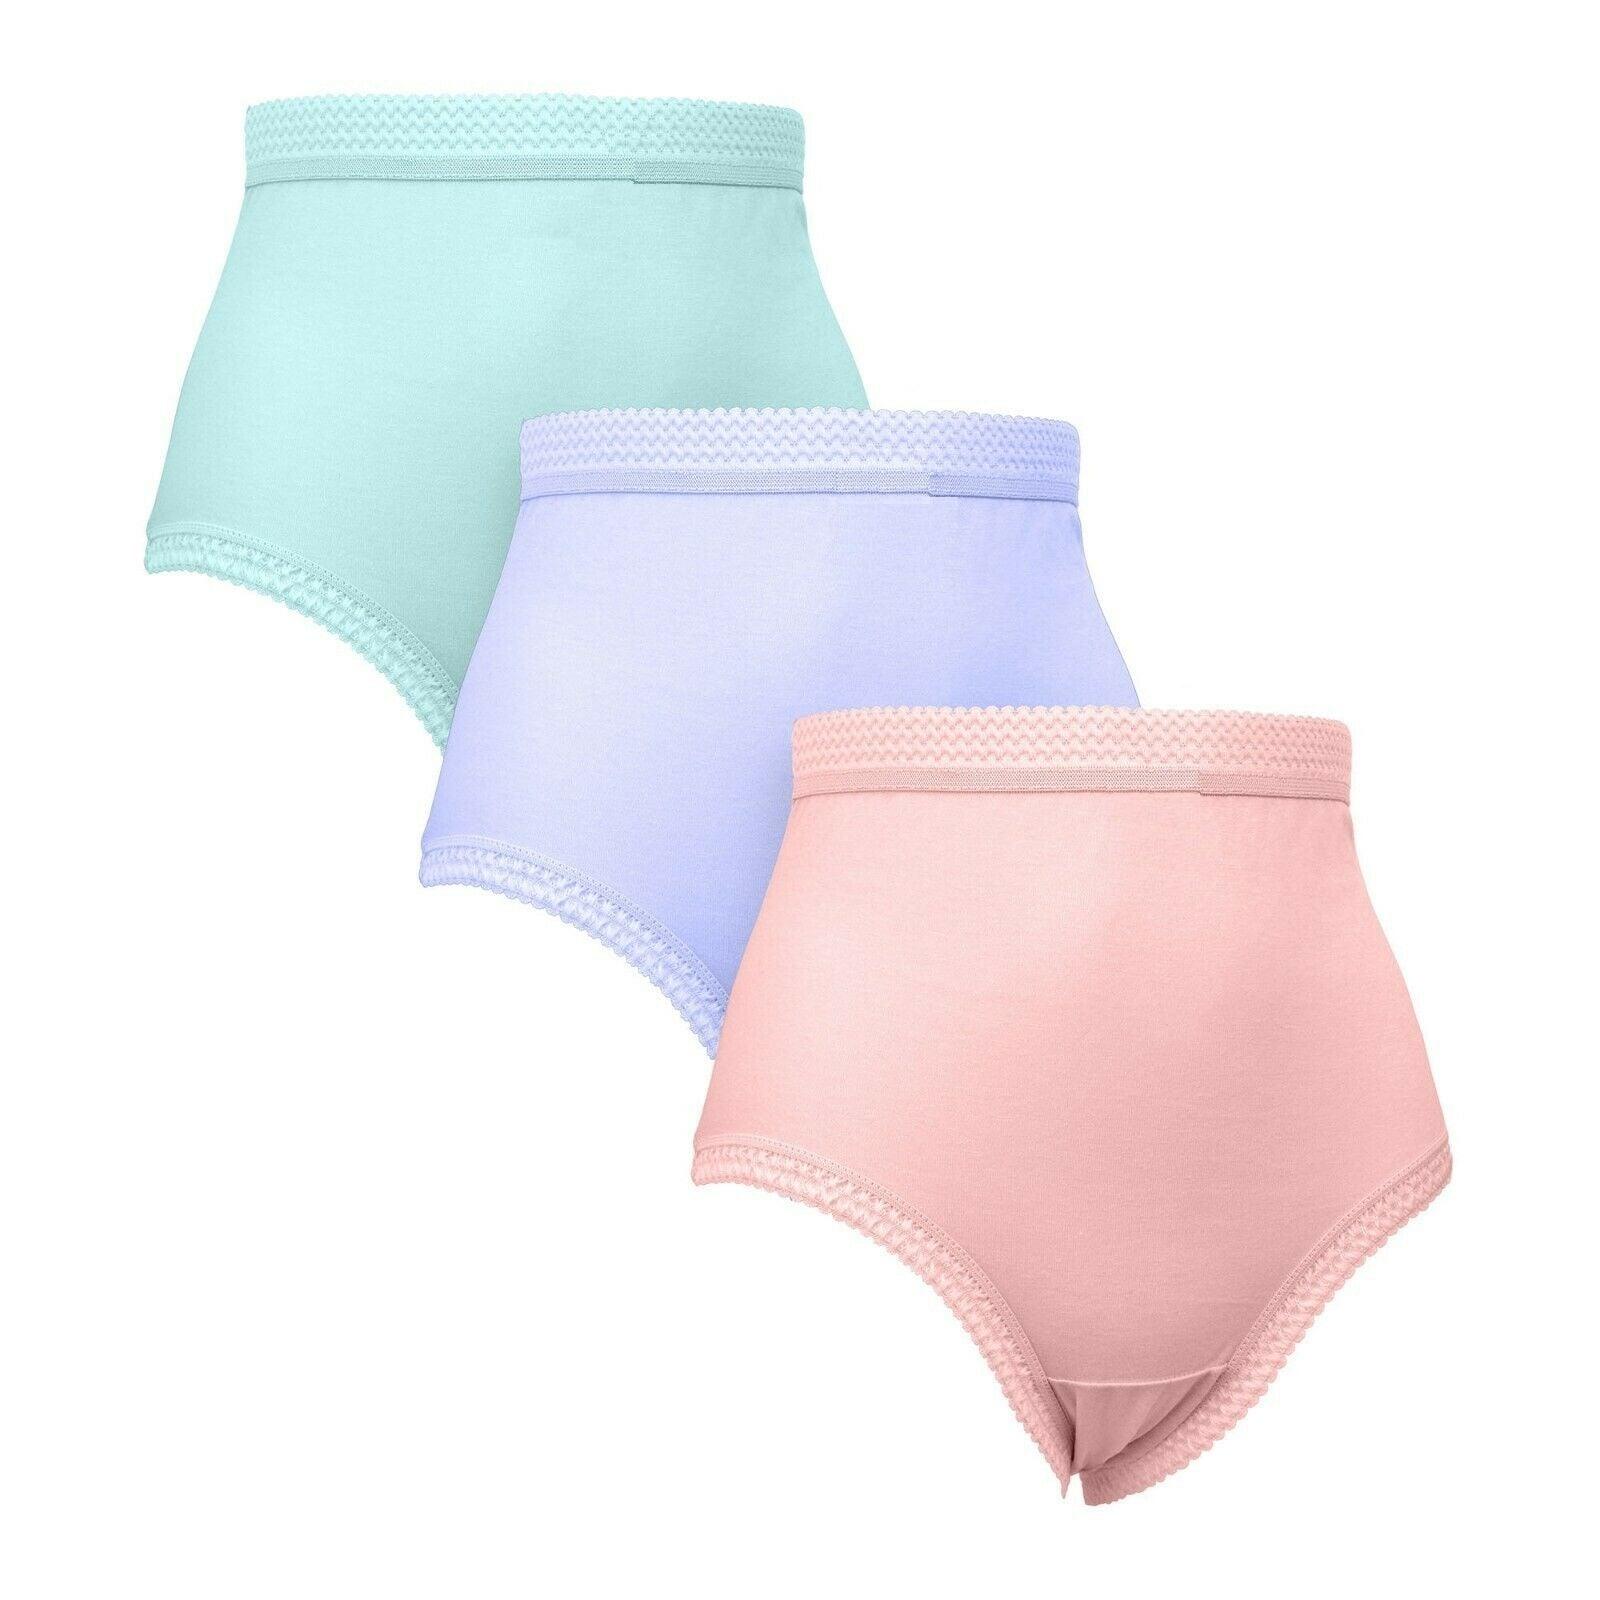 6 Pairs Ladies Assorted Colors Underwear Knickers Briefs Underpants 100% Cotton Maxi Briefs Womens Nickers Pastel Panties UK Wms-Xxxos - House Of Fashion Wear